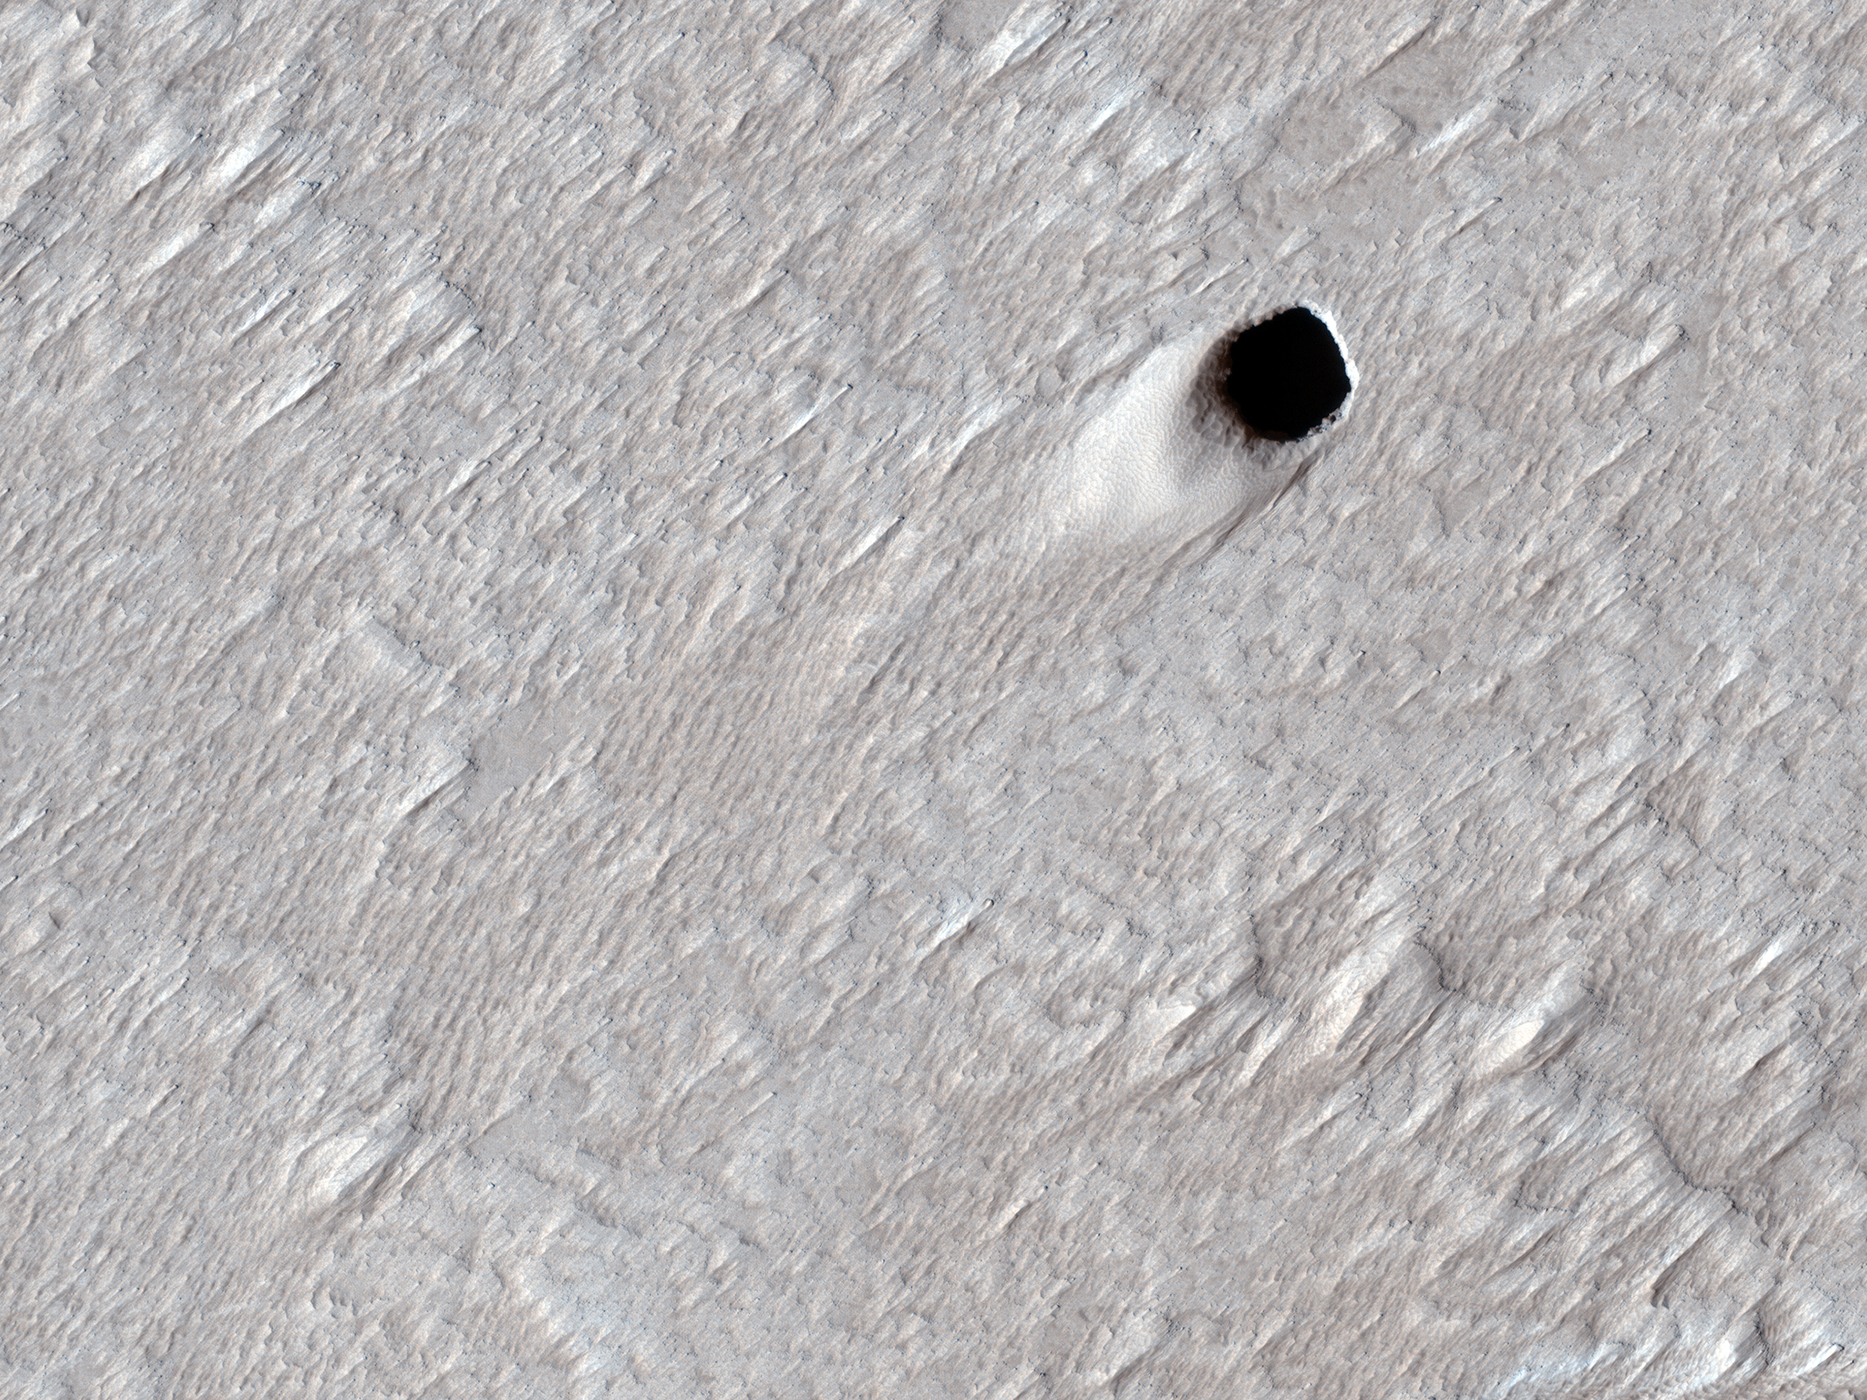 This pit crater was created by an empty lava tube in Mars’ Arsia Mons region. The image was captured by NASA’s Mars Reconnaissance Orbiter on Aug. 16, 2020.